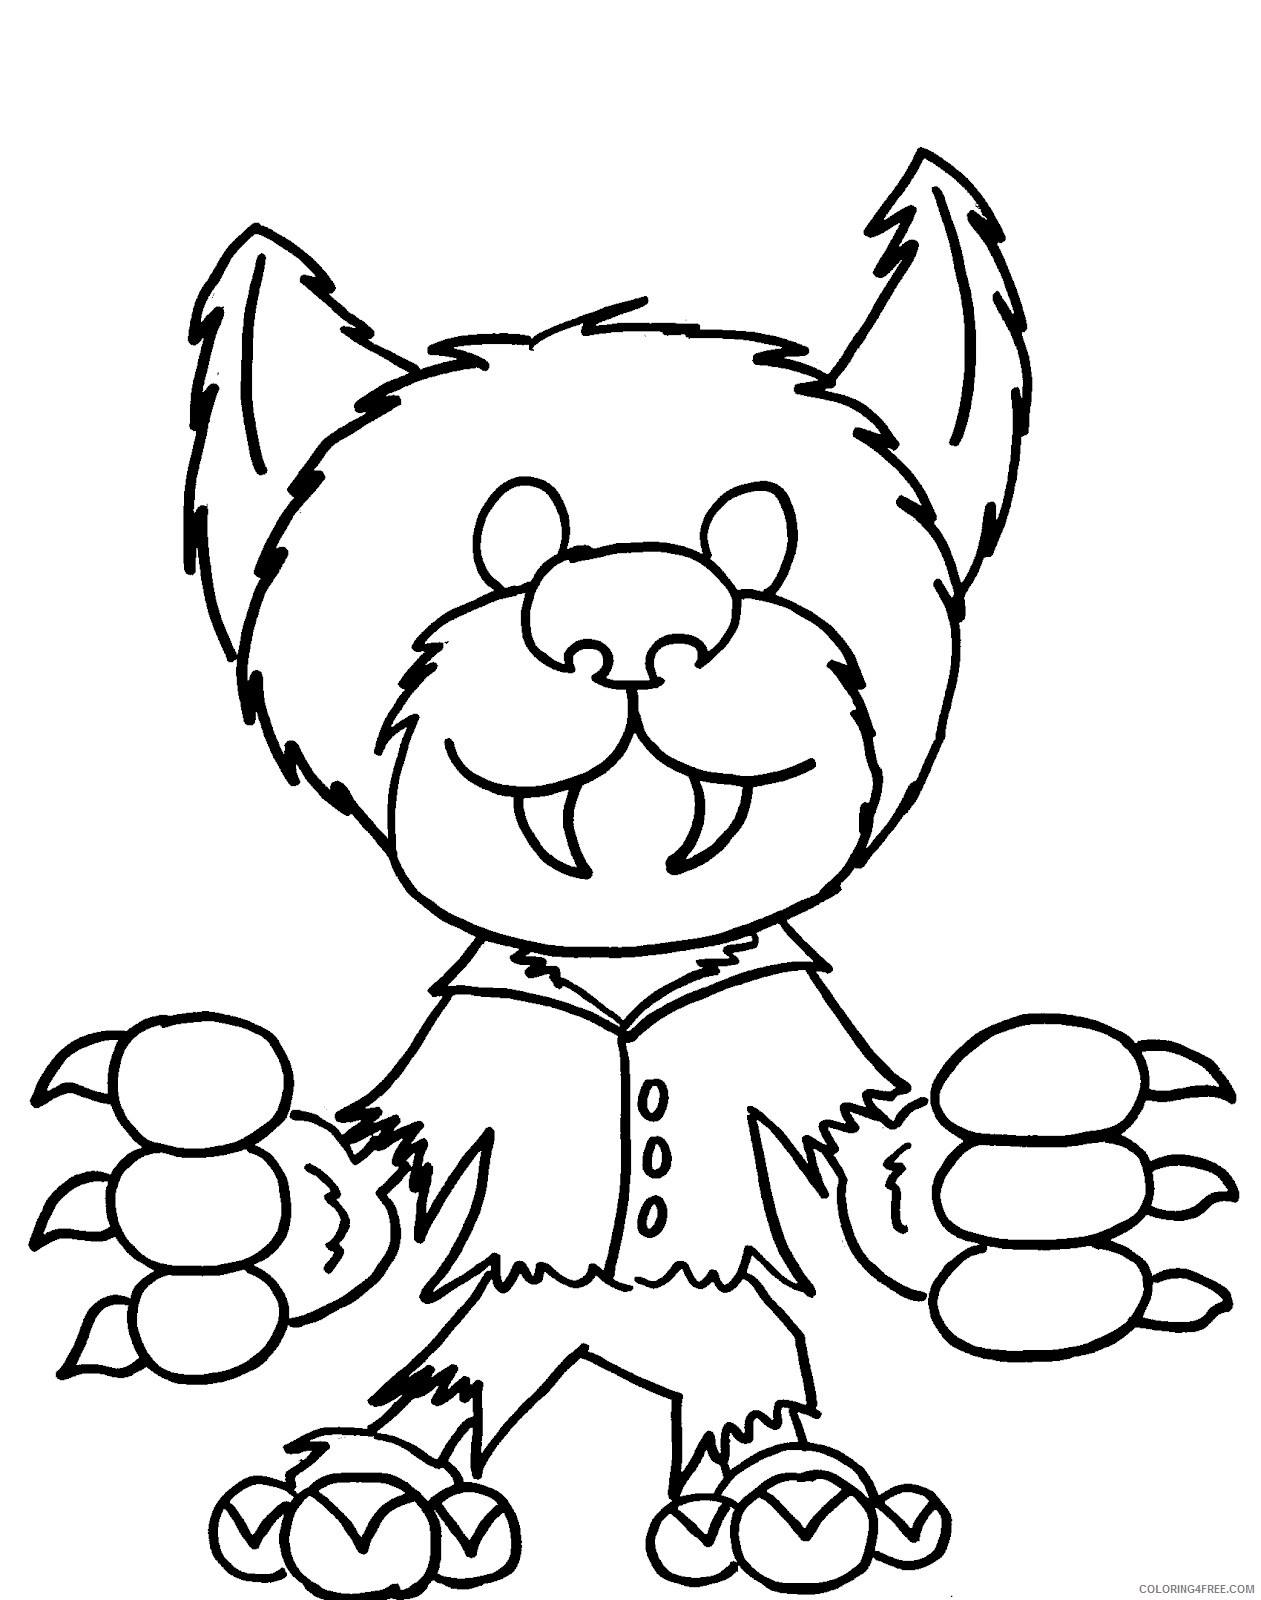 monster coloring pages werewolf Coloring4free - Coloring4Free.com